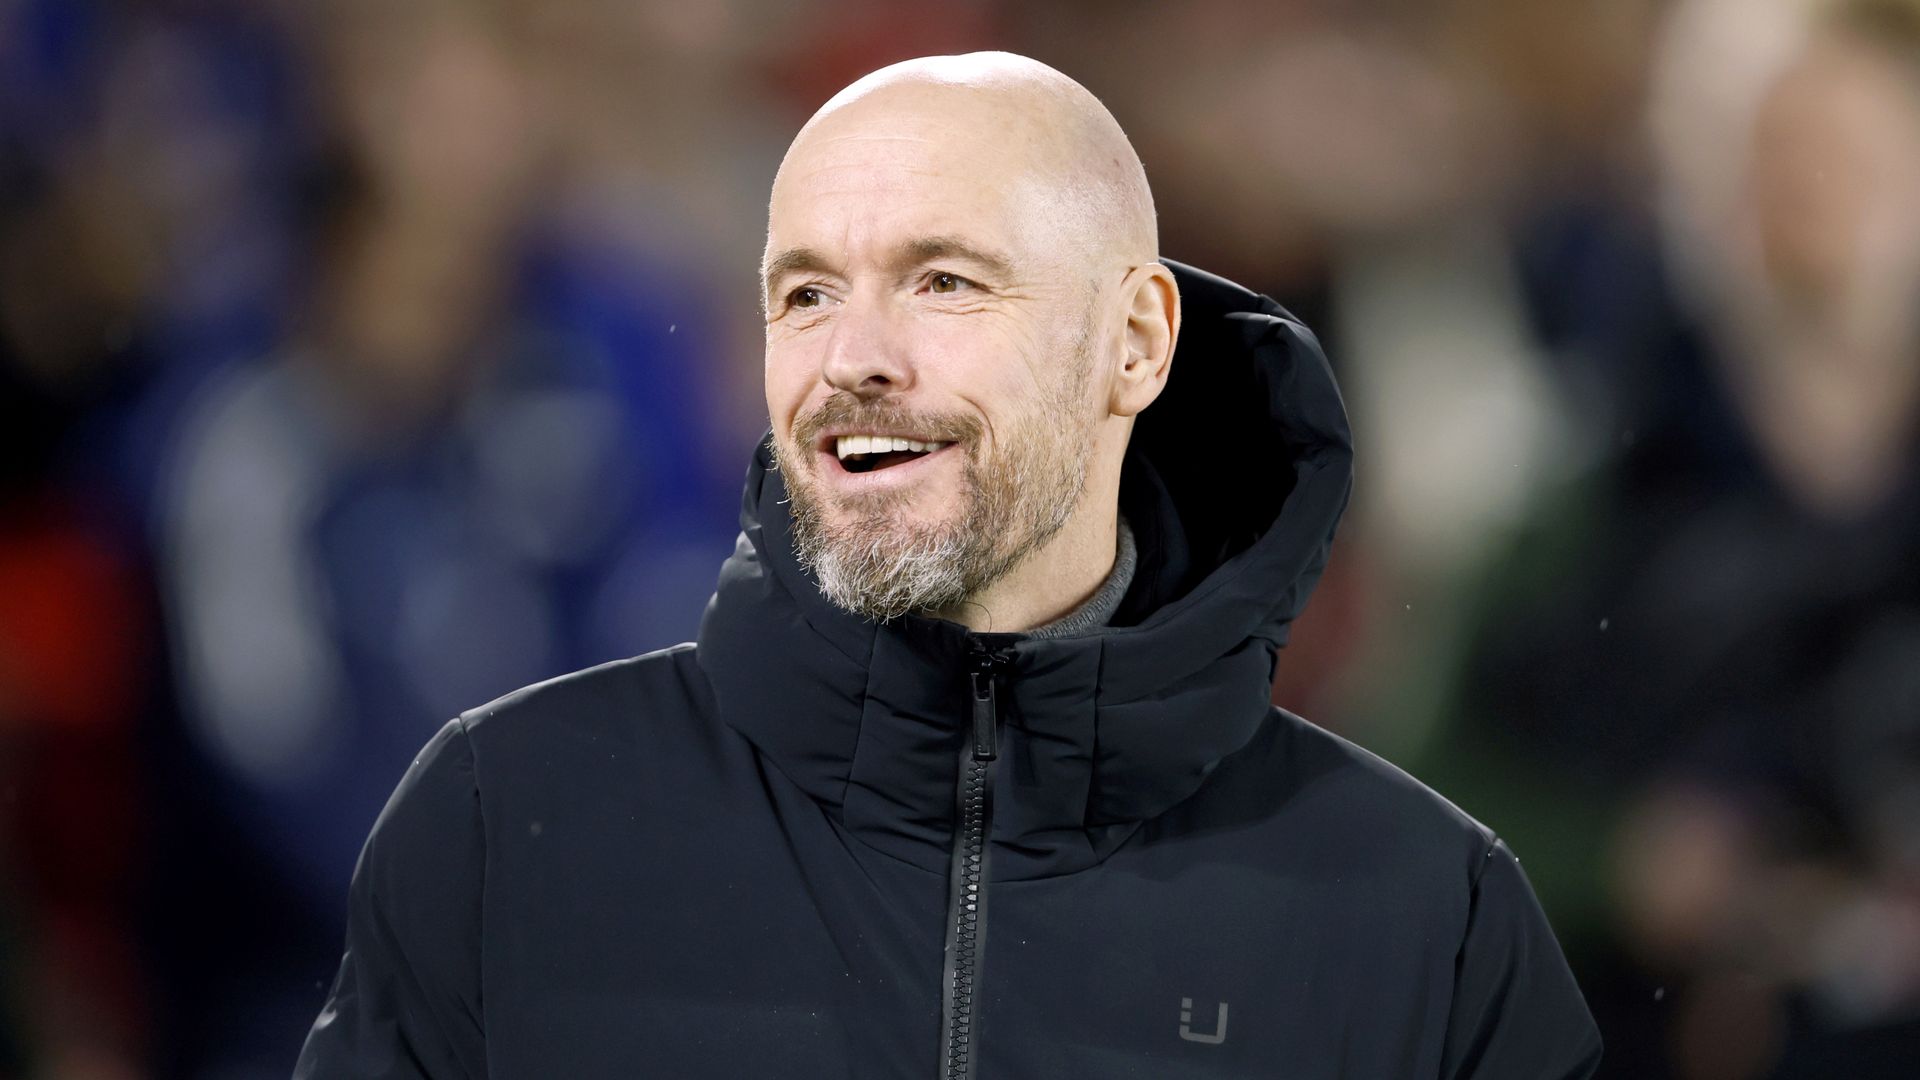 Ten Hag: Everyone at Man Utd very aligned to achieve the highest